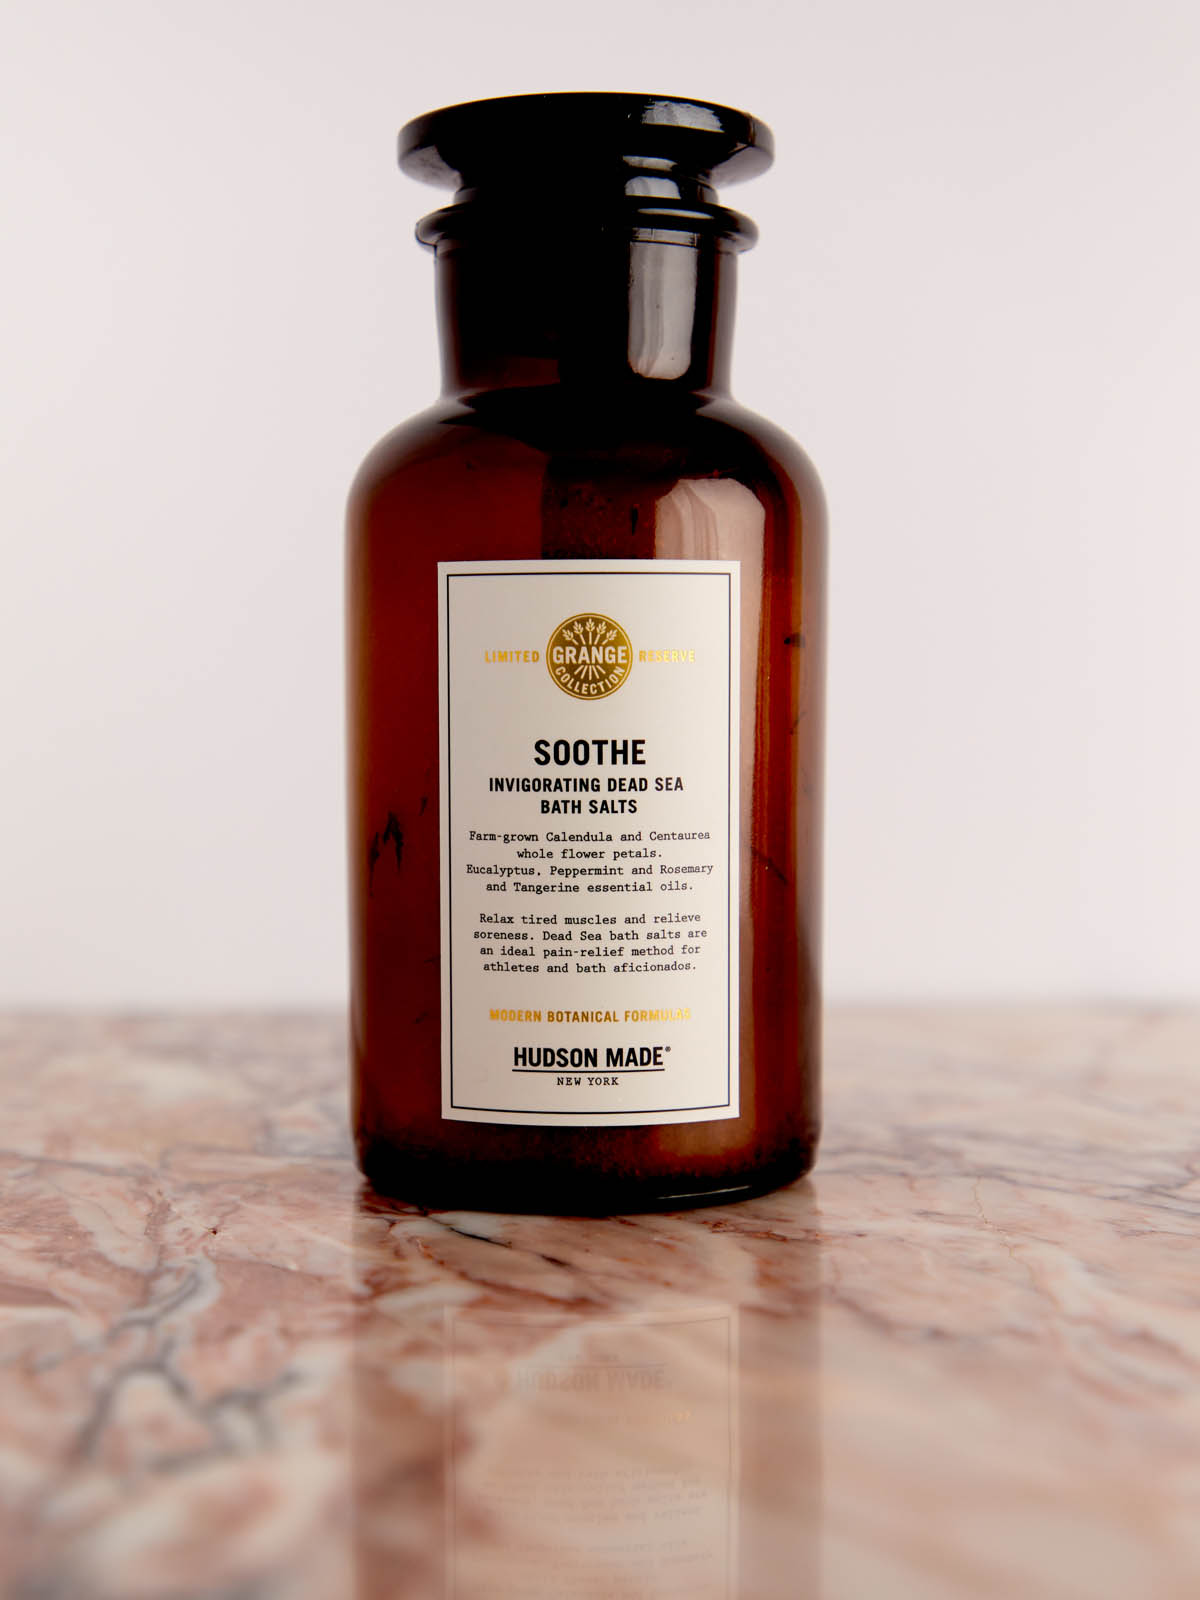 Soothe - Invigorating Dead Sea Salts in glass bottle on pink marble by Hudson Made